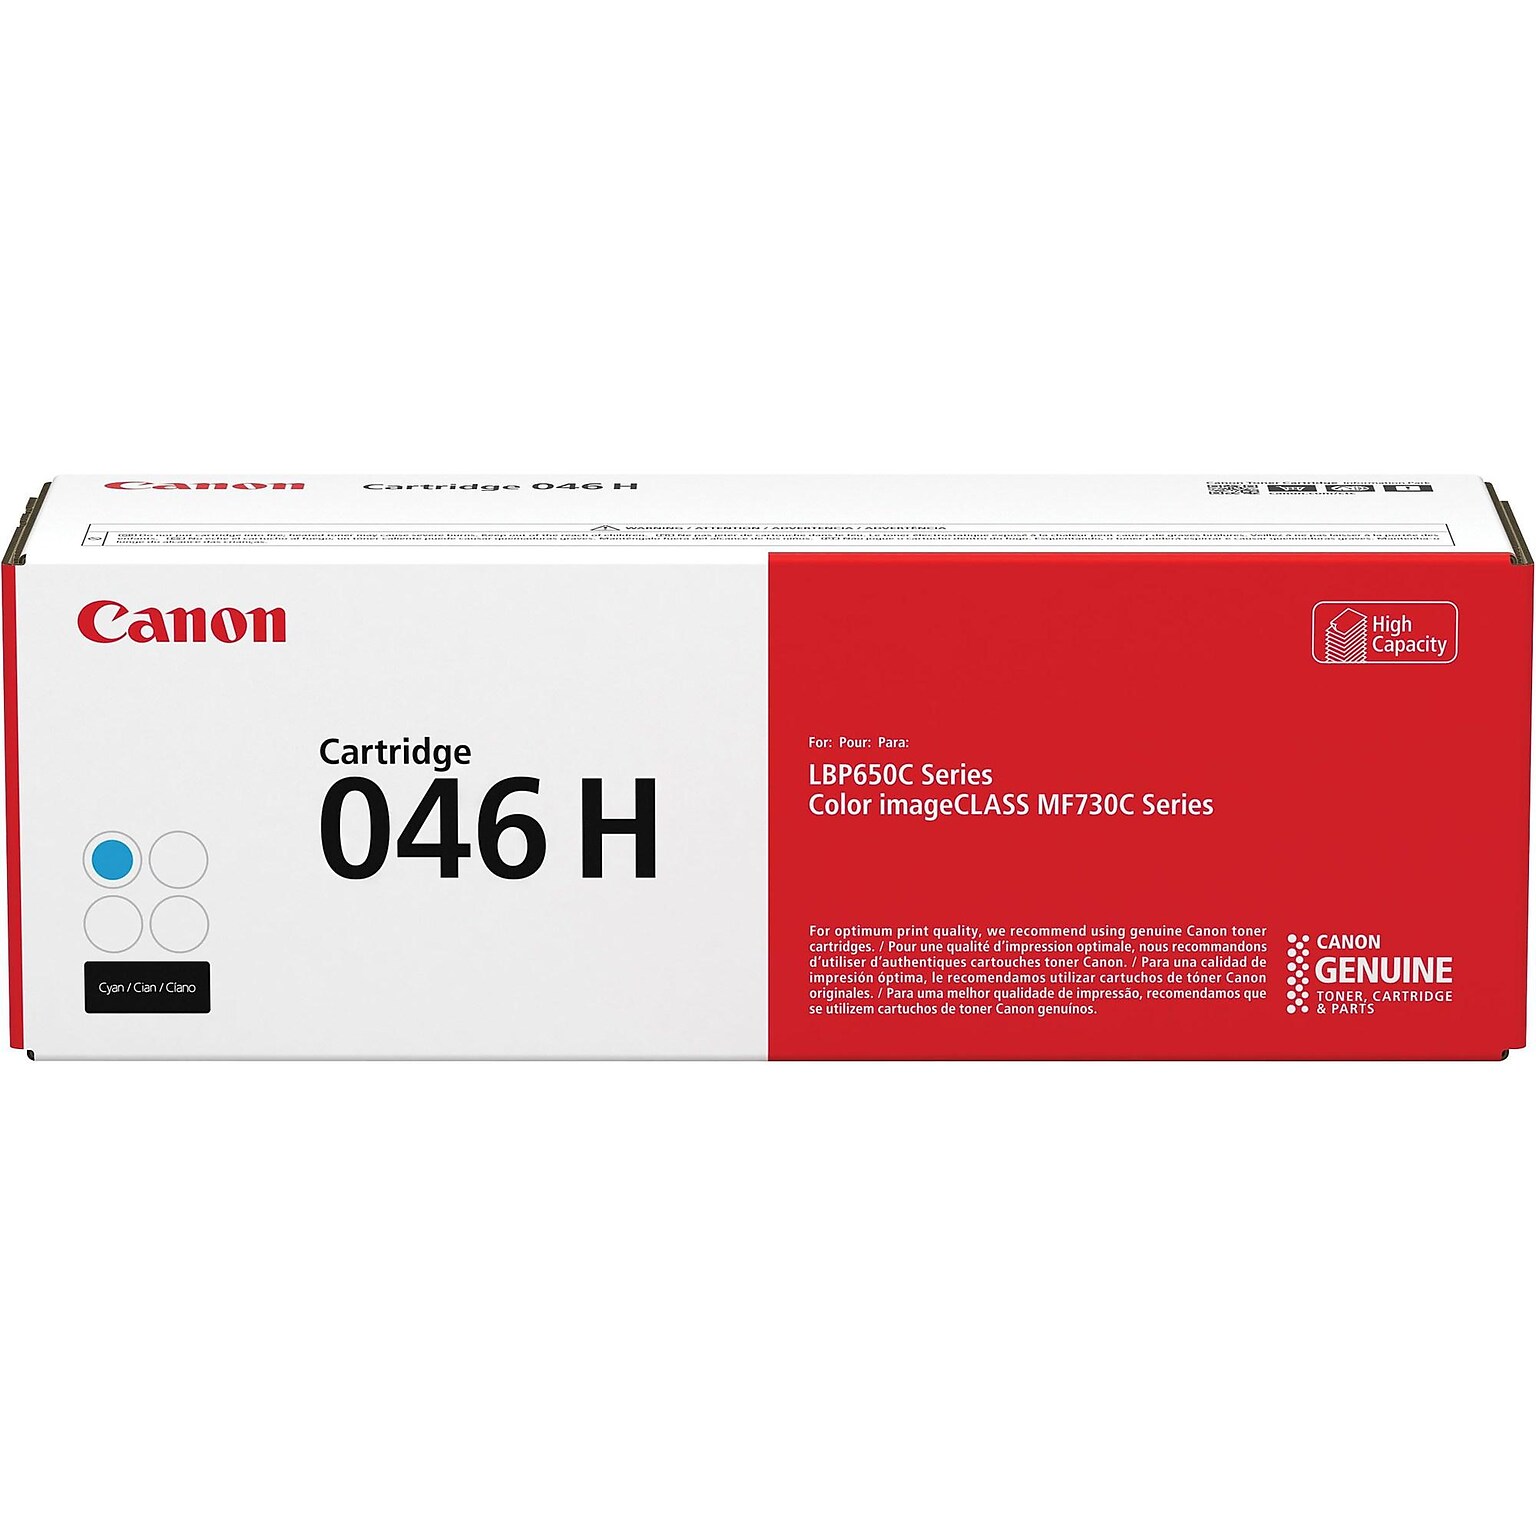 Canon 046 H Cyan High Yield Toner Cartridge, Prints Up to 5,000 Pages (1253C001)